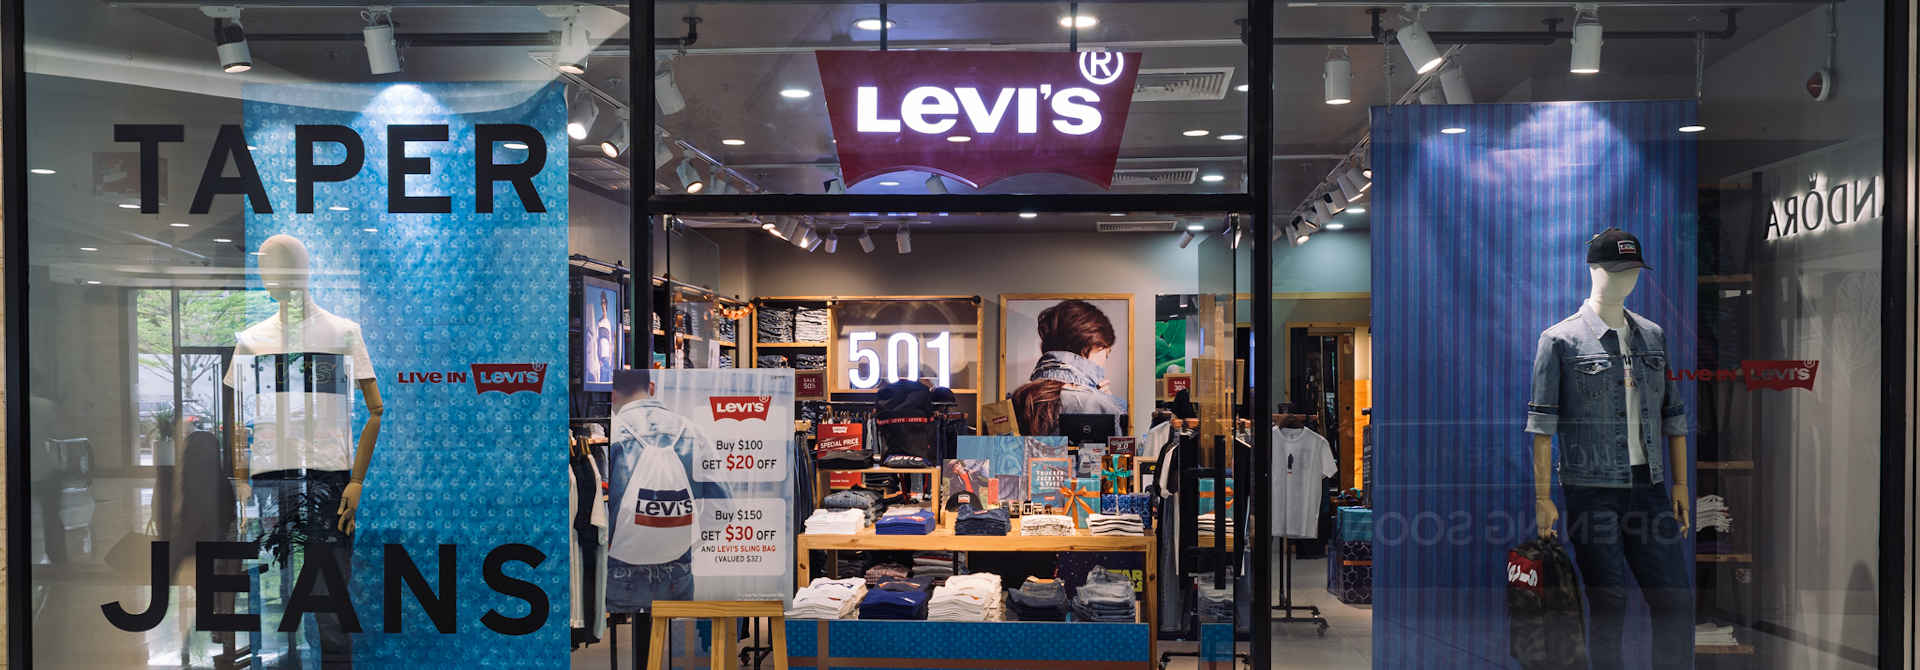 Levis Shop - Exchange Square Shopping Mall